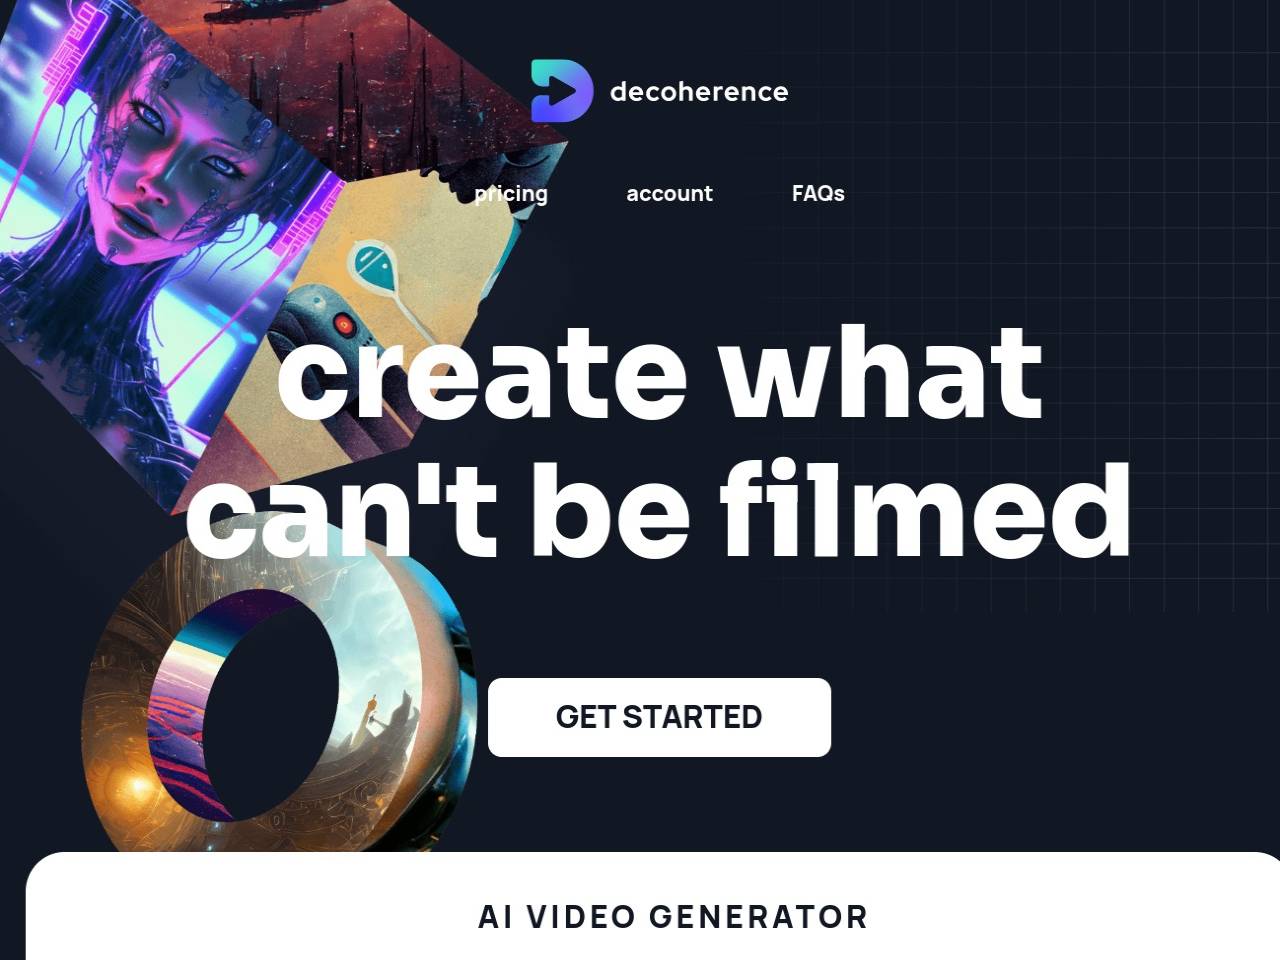 Decoherence: Revolutionizing Video Creation with AI-Powered Generative Magic